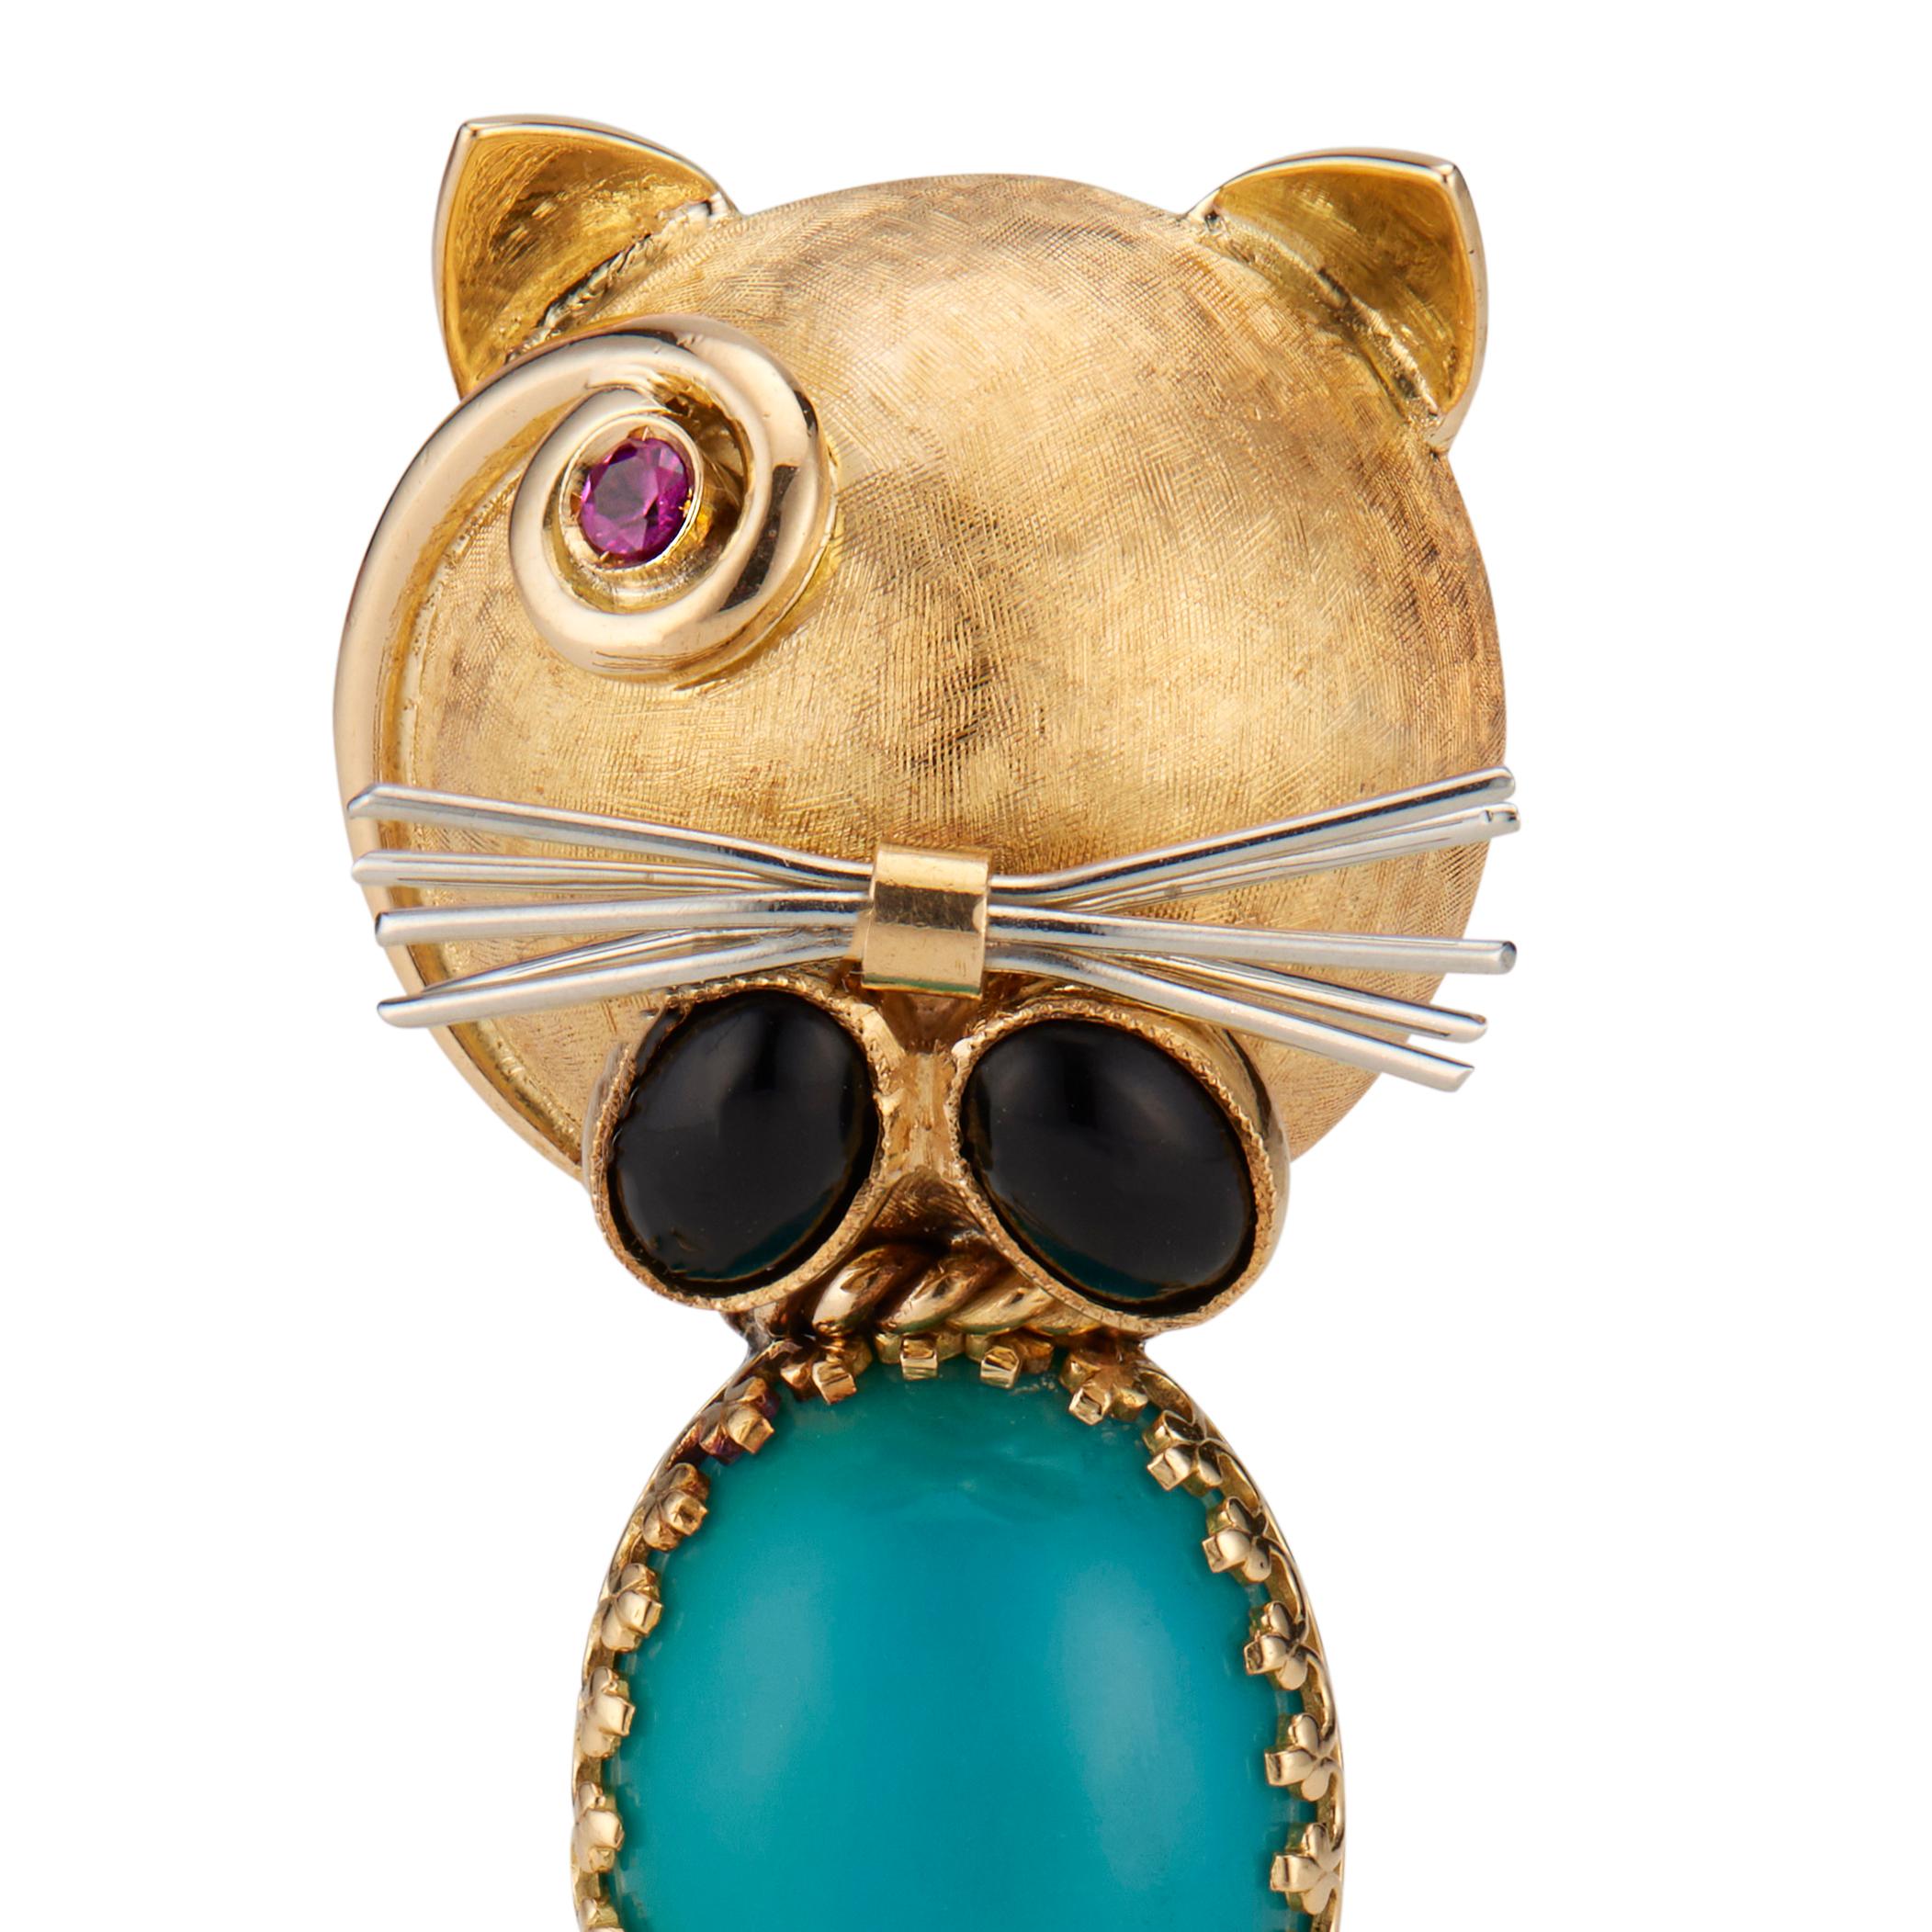 1950's handmade mid-century cat brooch. Oval Persian turquoise with 2 oval onyx and one ruby key set in 18k yellow gold. 18 White gold whiskers.   

2 oval cabochon onyx 6mm x 4mm
1 oval cabochon turquoise 17mm x 12mm
 1 round ruby approx. total